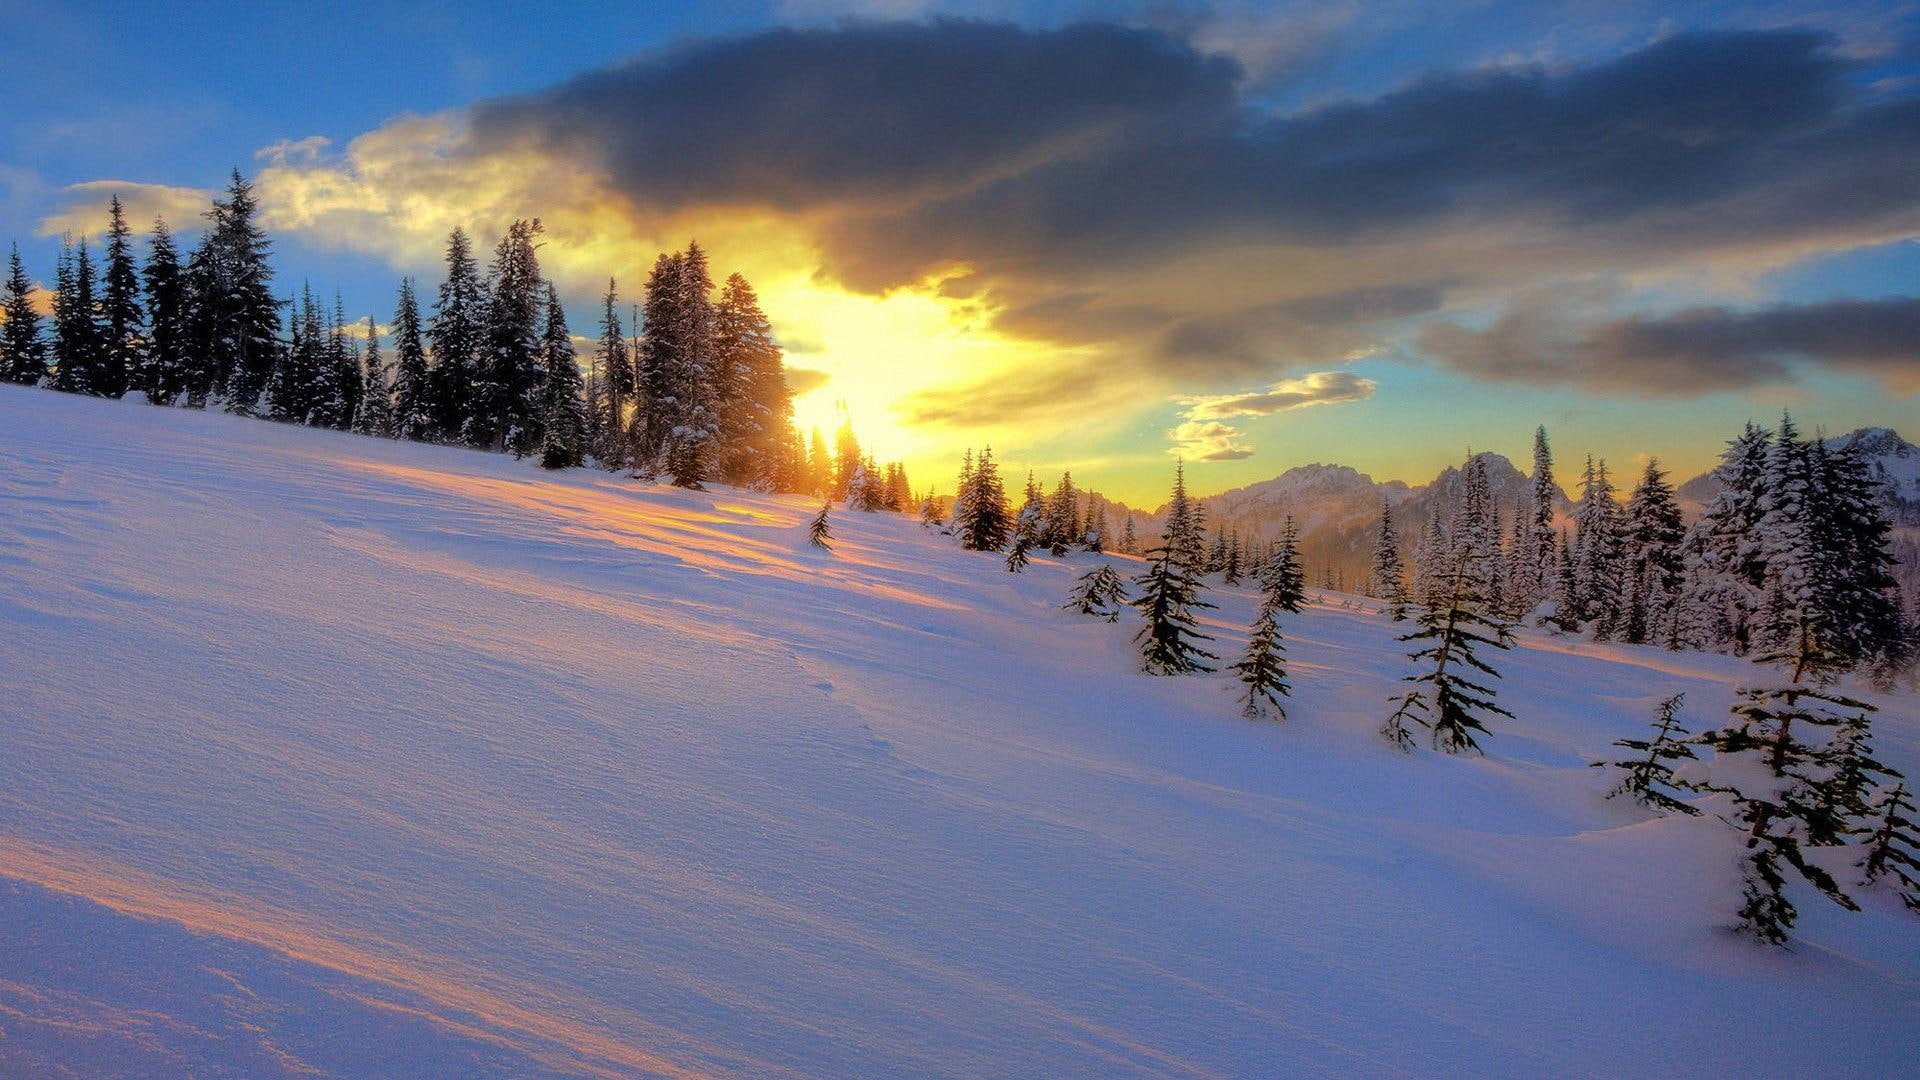 Snowy hills in the sunset, snow covered mountain and pine trees